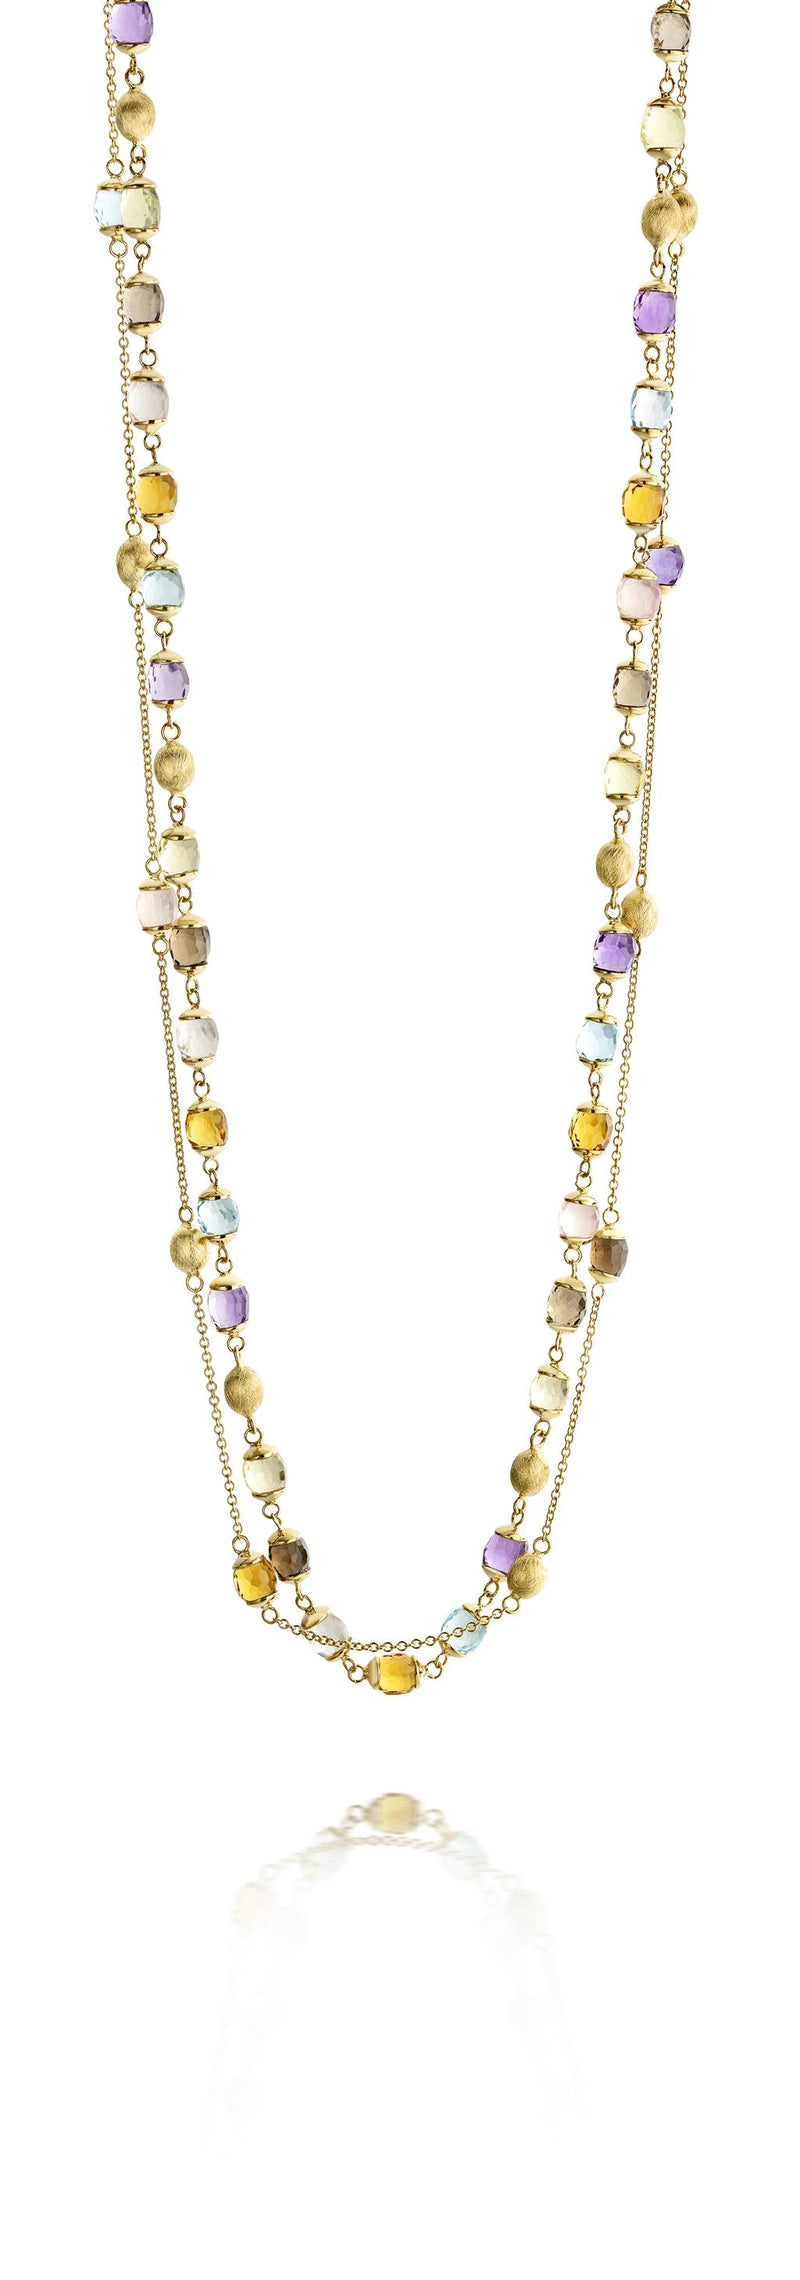 Nanis 18K Yellow Gold and Multi- Colored Quartz Necklace